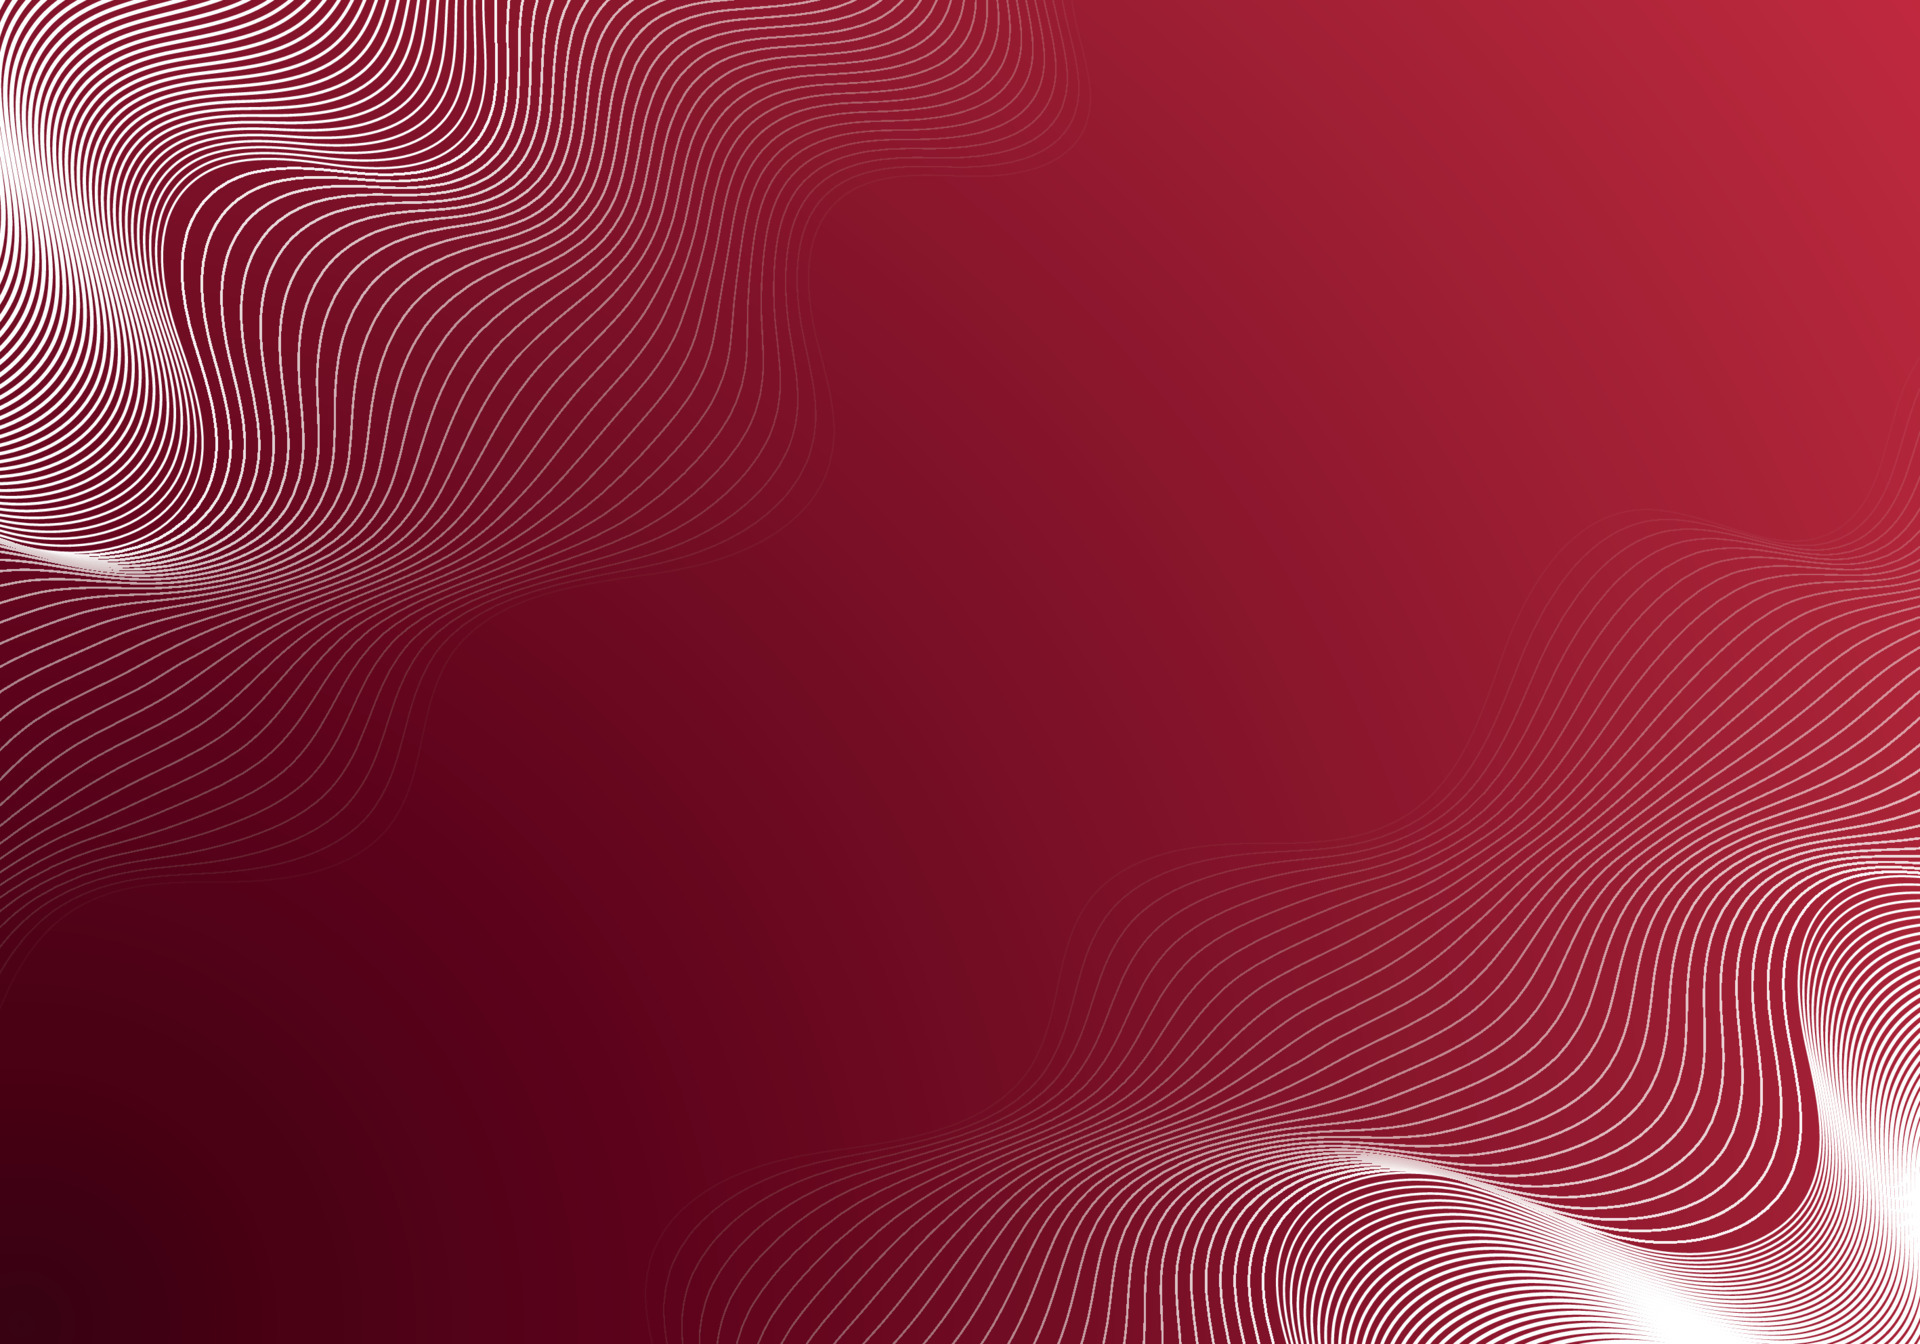 https://static.vecteezy.com/system/resources/previews/017/710/525/original/premium-background-design-with-diagonal-line-pattern-in-maroon-colour-horizontal-template-for-digital-lux-business-banner-formal-invitation-luxury-voucher-prestigious-gift-certificate-vector.jpg